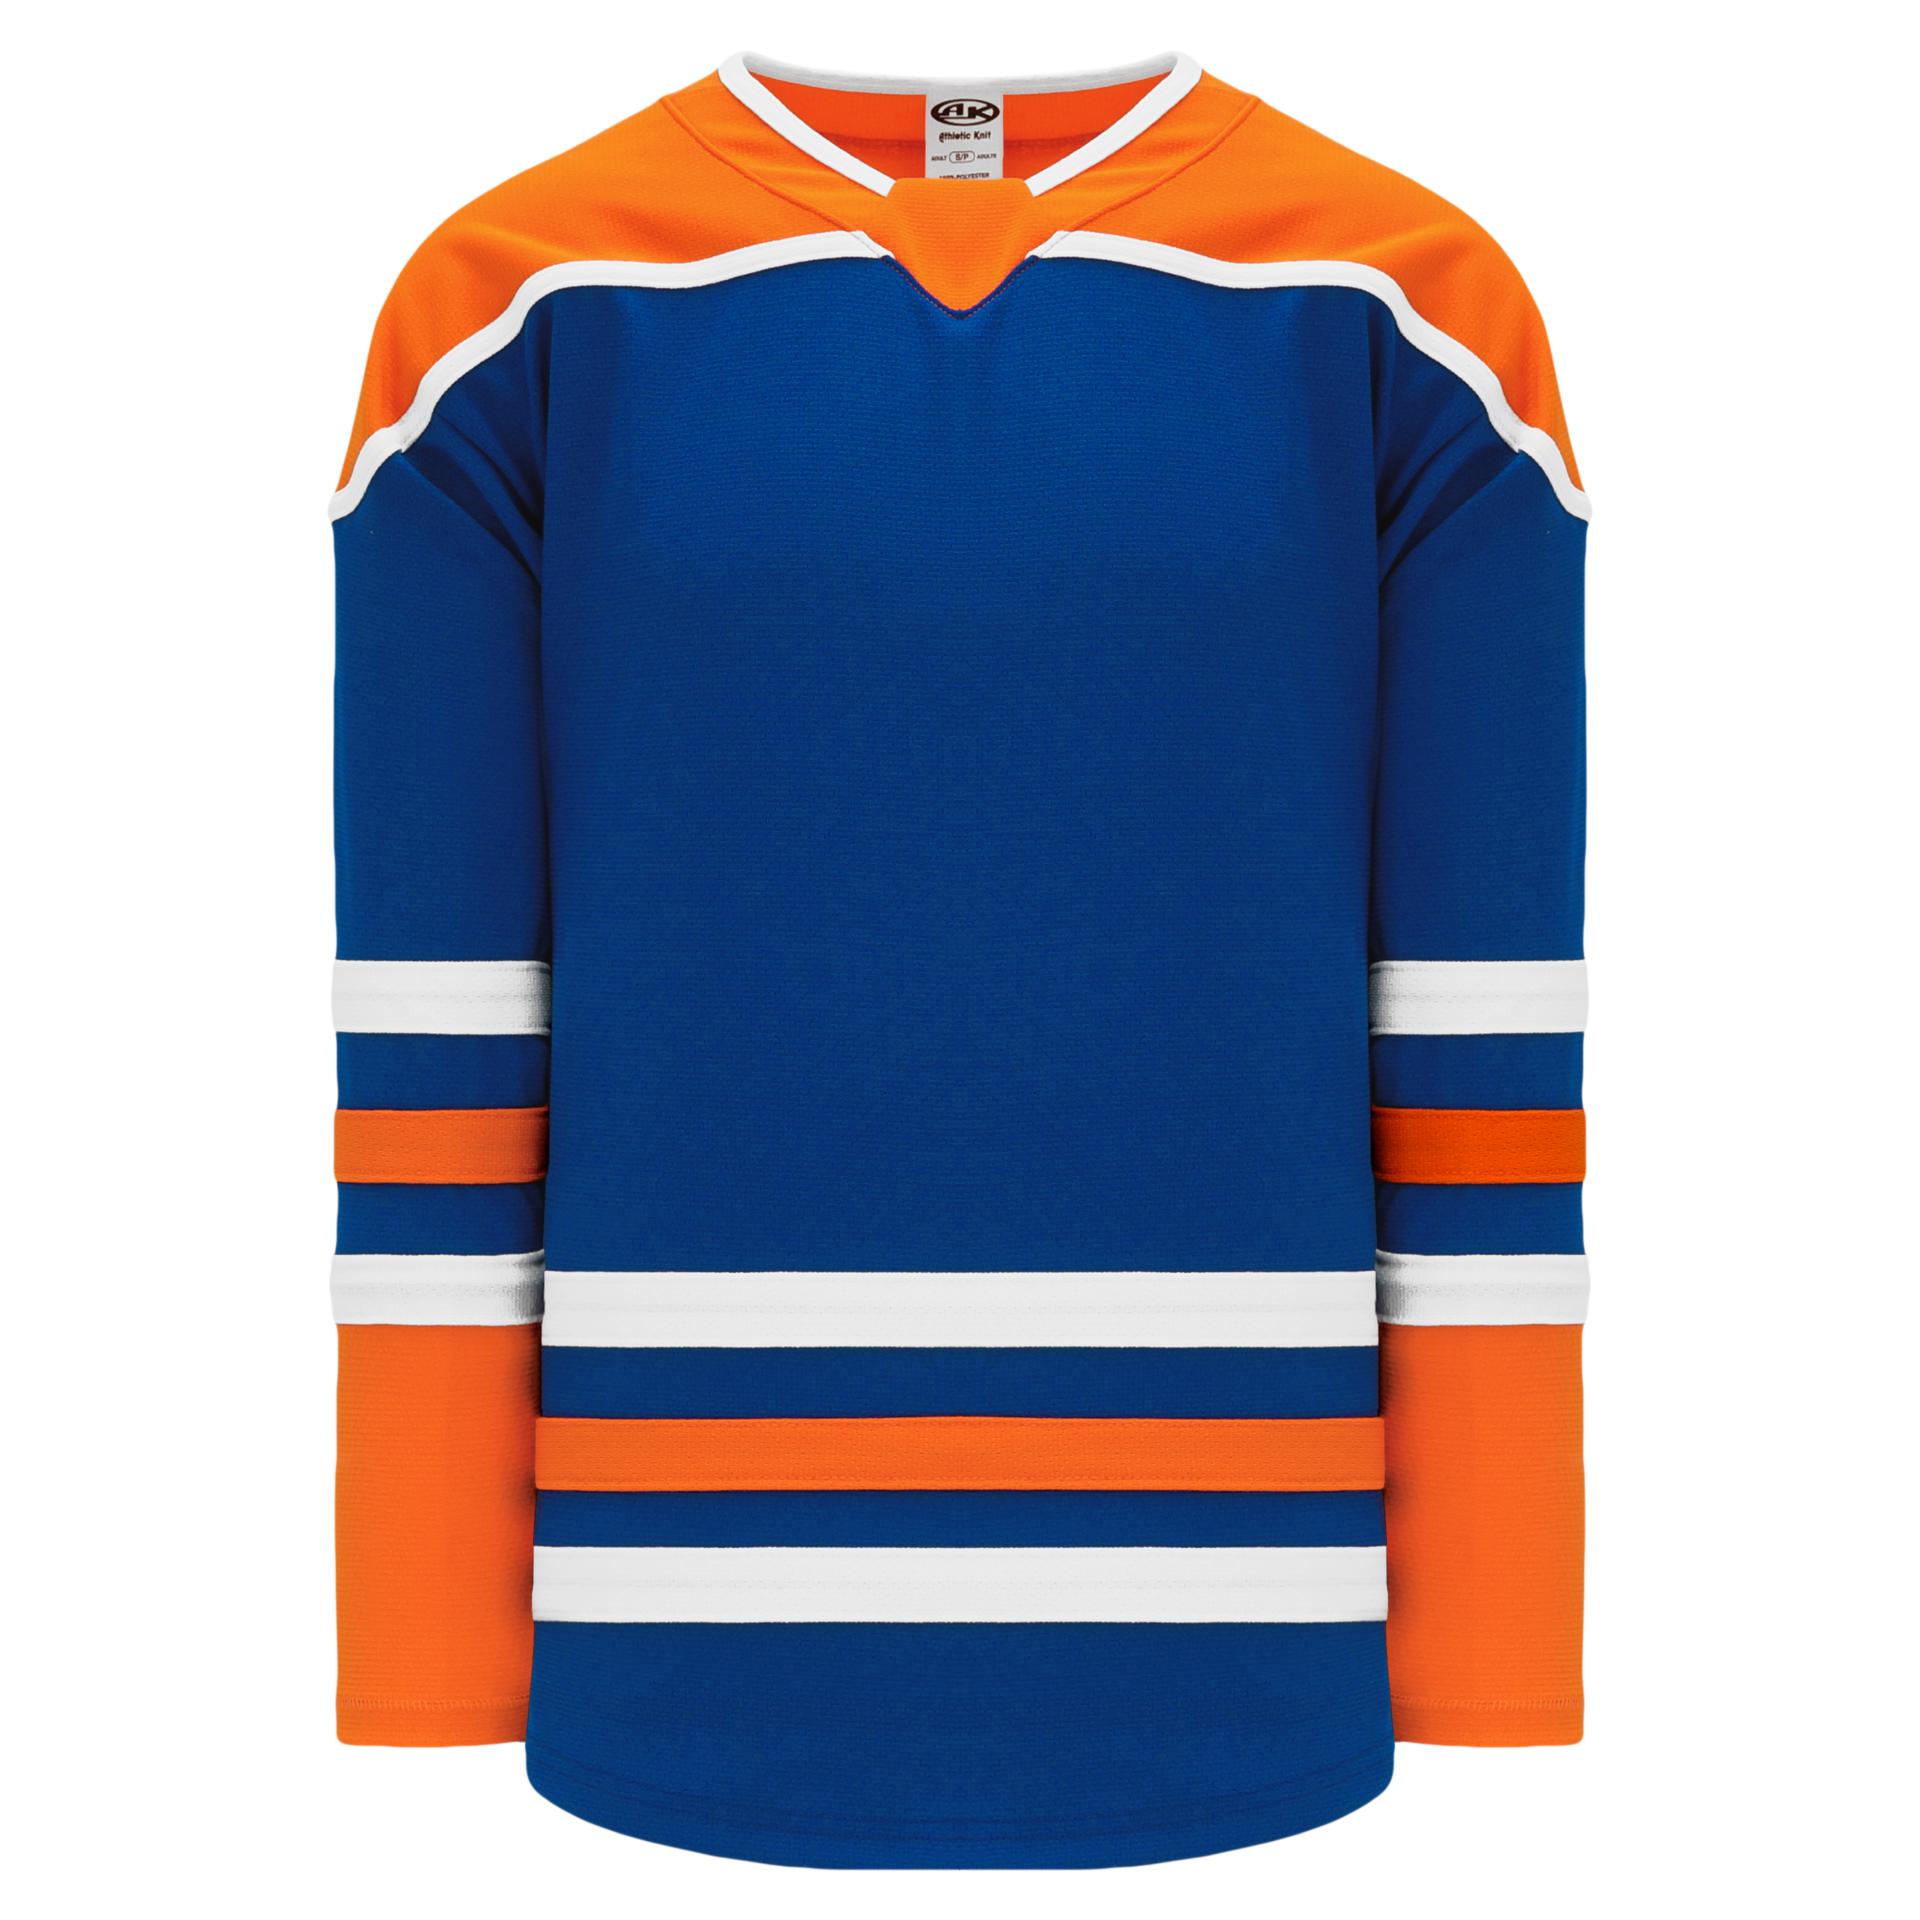 Oilers, Flames going retro with throwback-style jerseys for